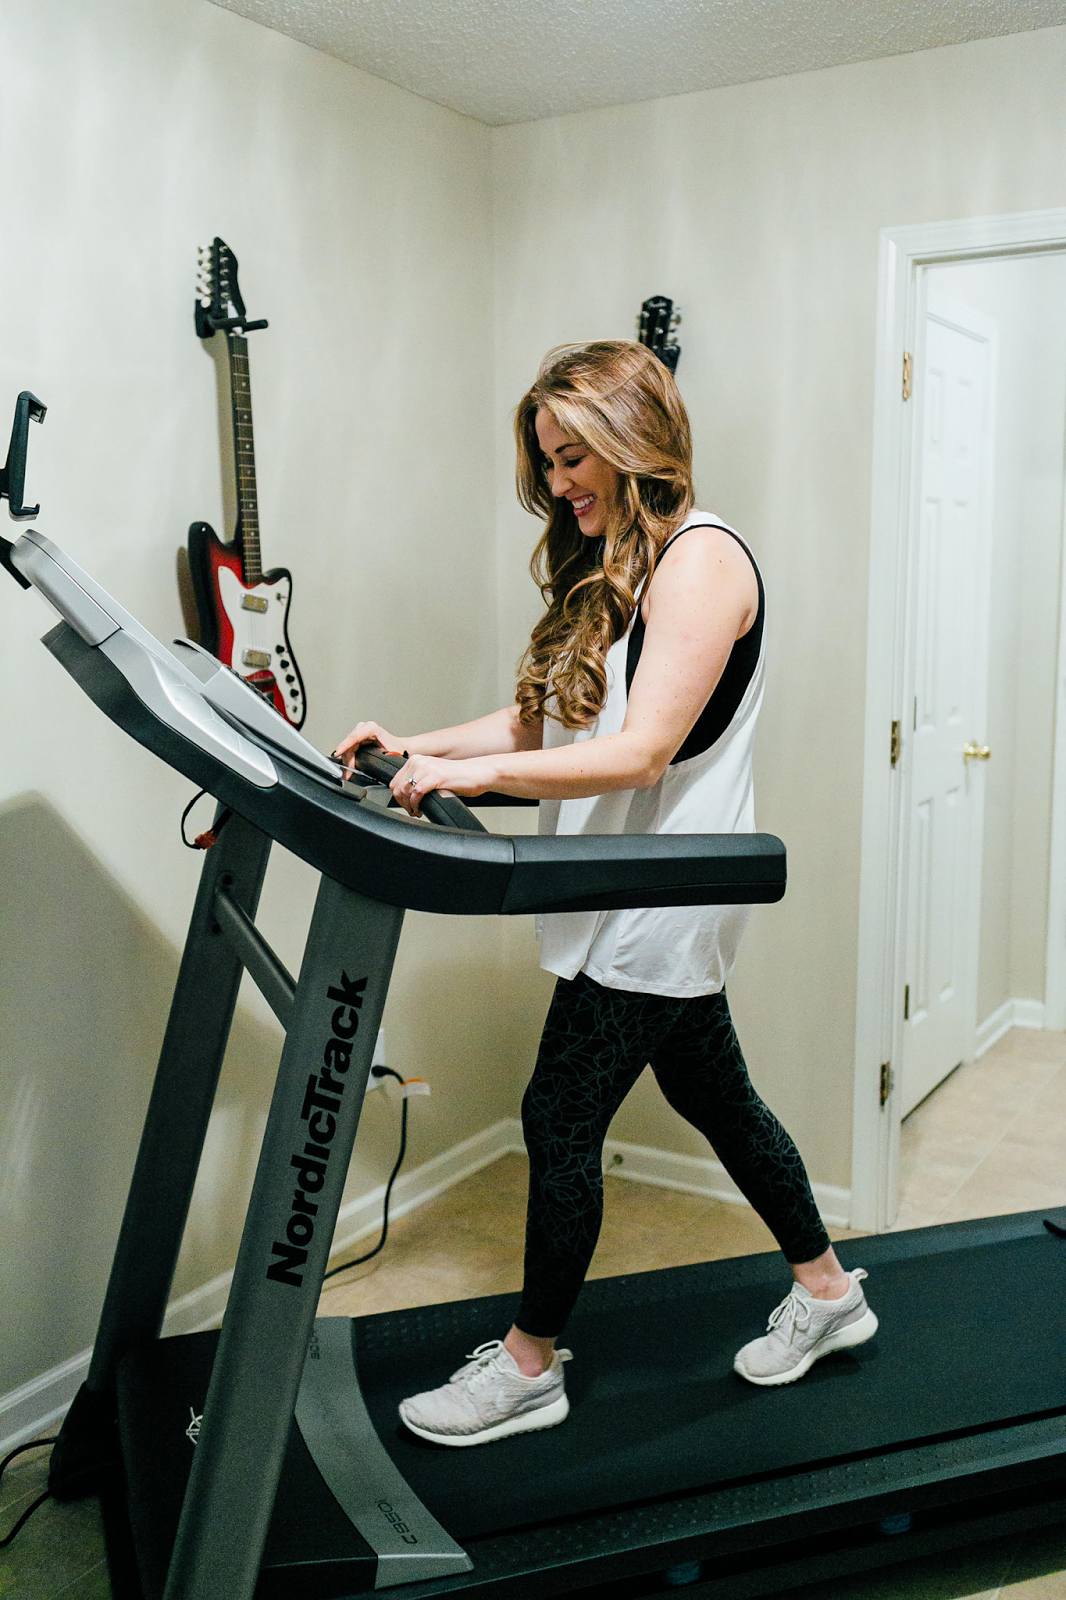 5 Tips to Make Time For Exercise at Home by lifestyle blogger Laura from Walking in Memphis in High Heels